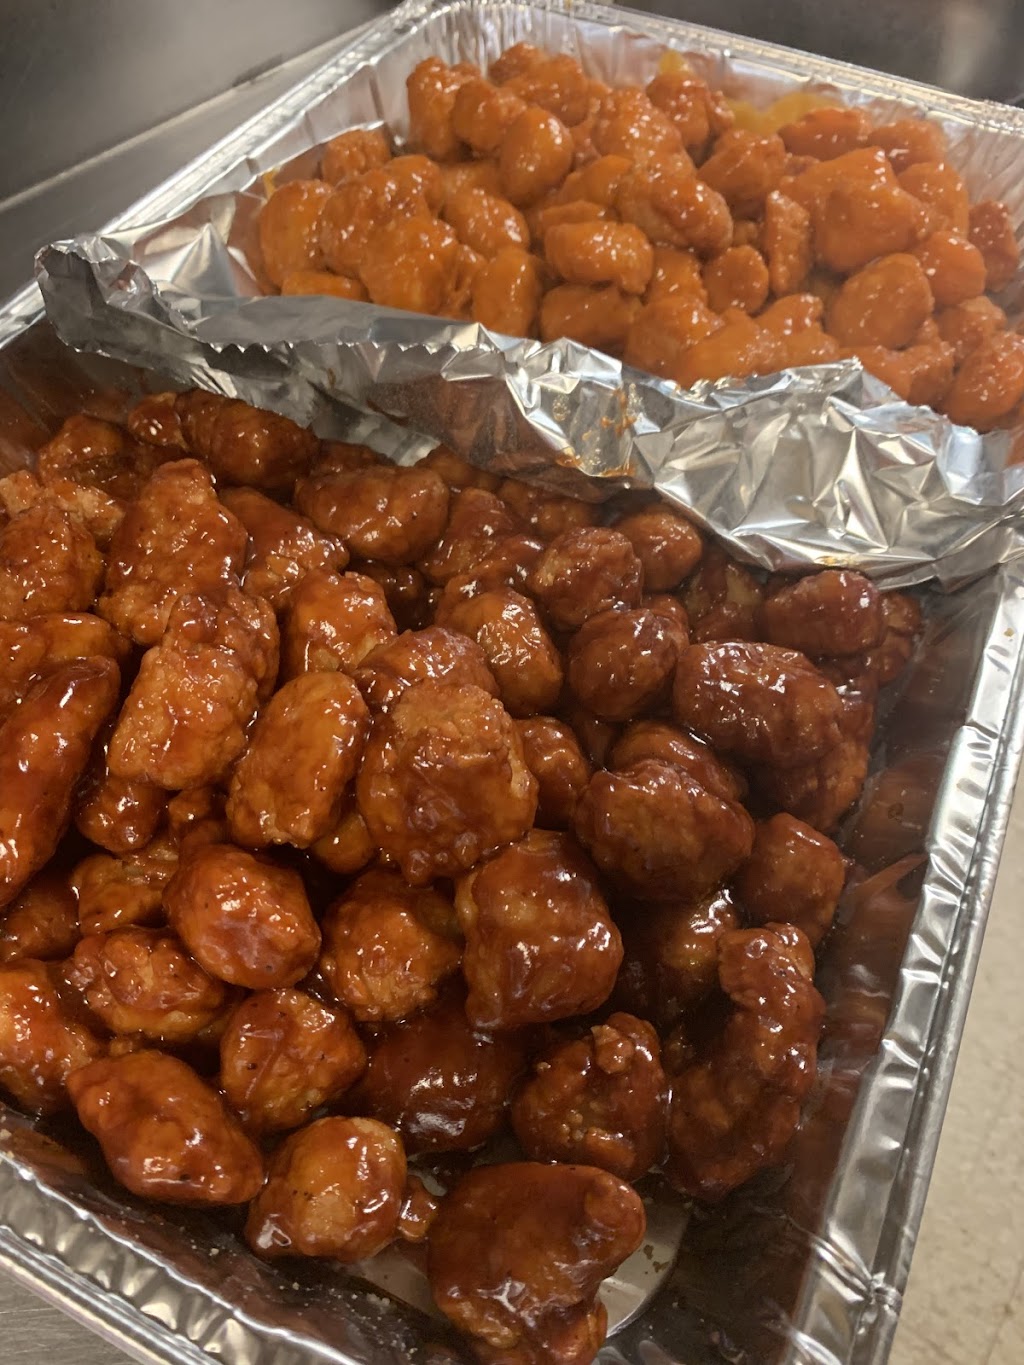 KCs Pizza N Wings | 871 Connetquot Ave, Islip Terrace, NY 11752 | Phone: (631) 650-0928